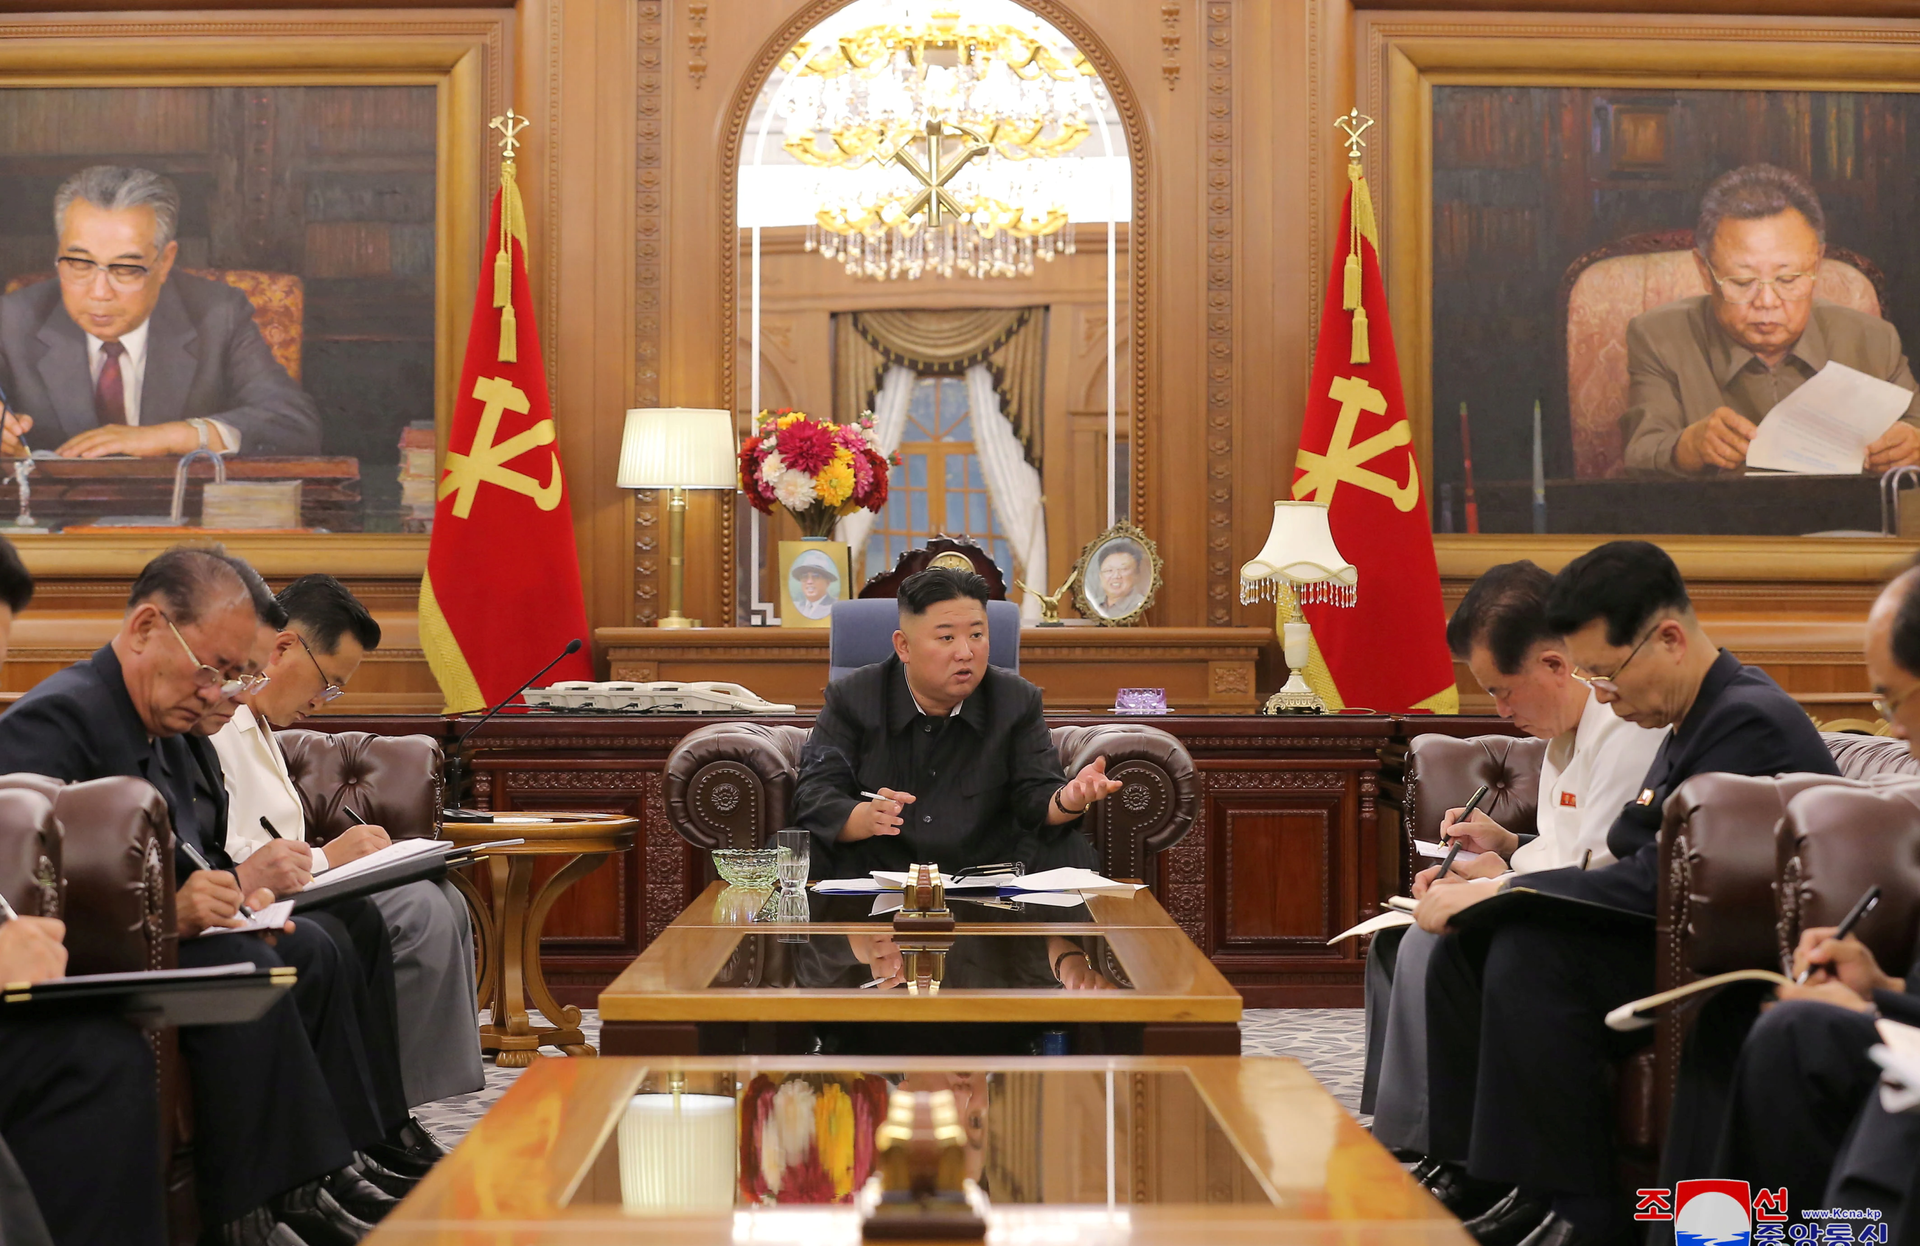  KCNA image of North Korean leader Kim Jong Un at a meeting with senior officials from the Workers' Party of Korea (WPK) Central Committee and Provincial Party Committees in Pyongyang, June 8, 2021. - Sputnik International, 1920, 07.09.2021